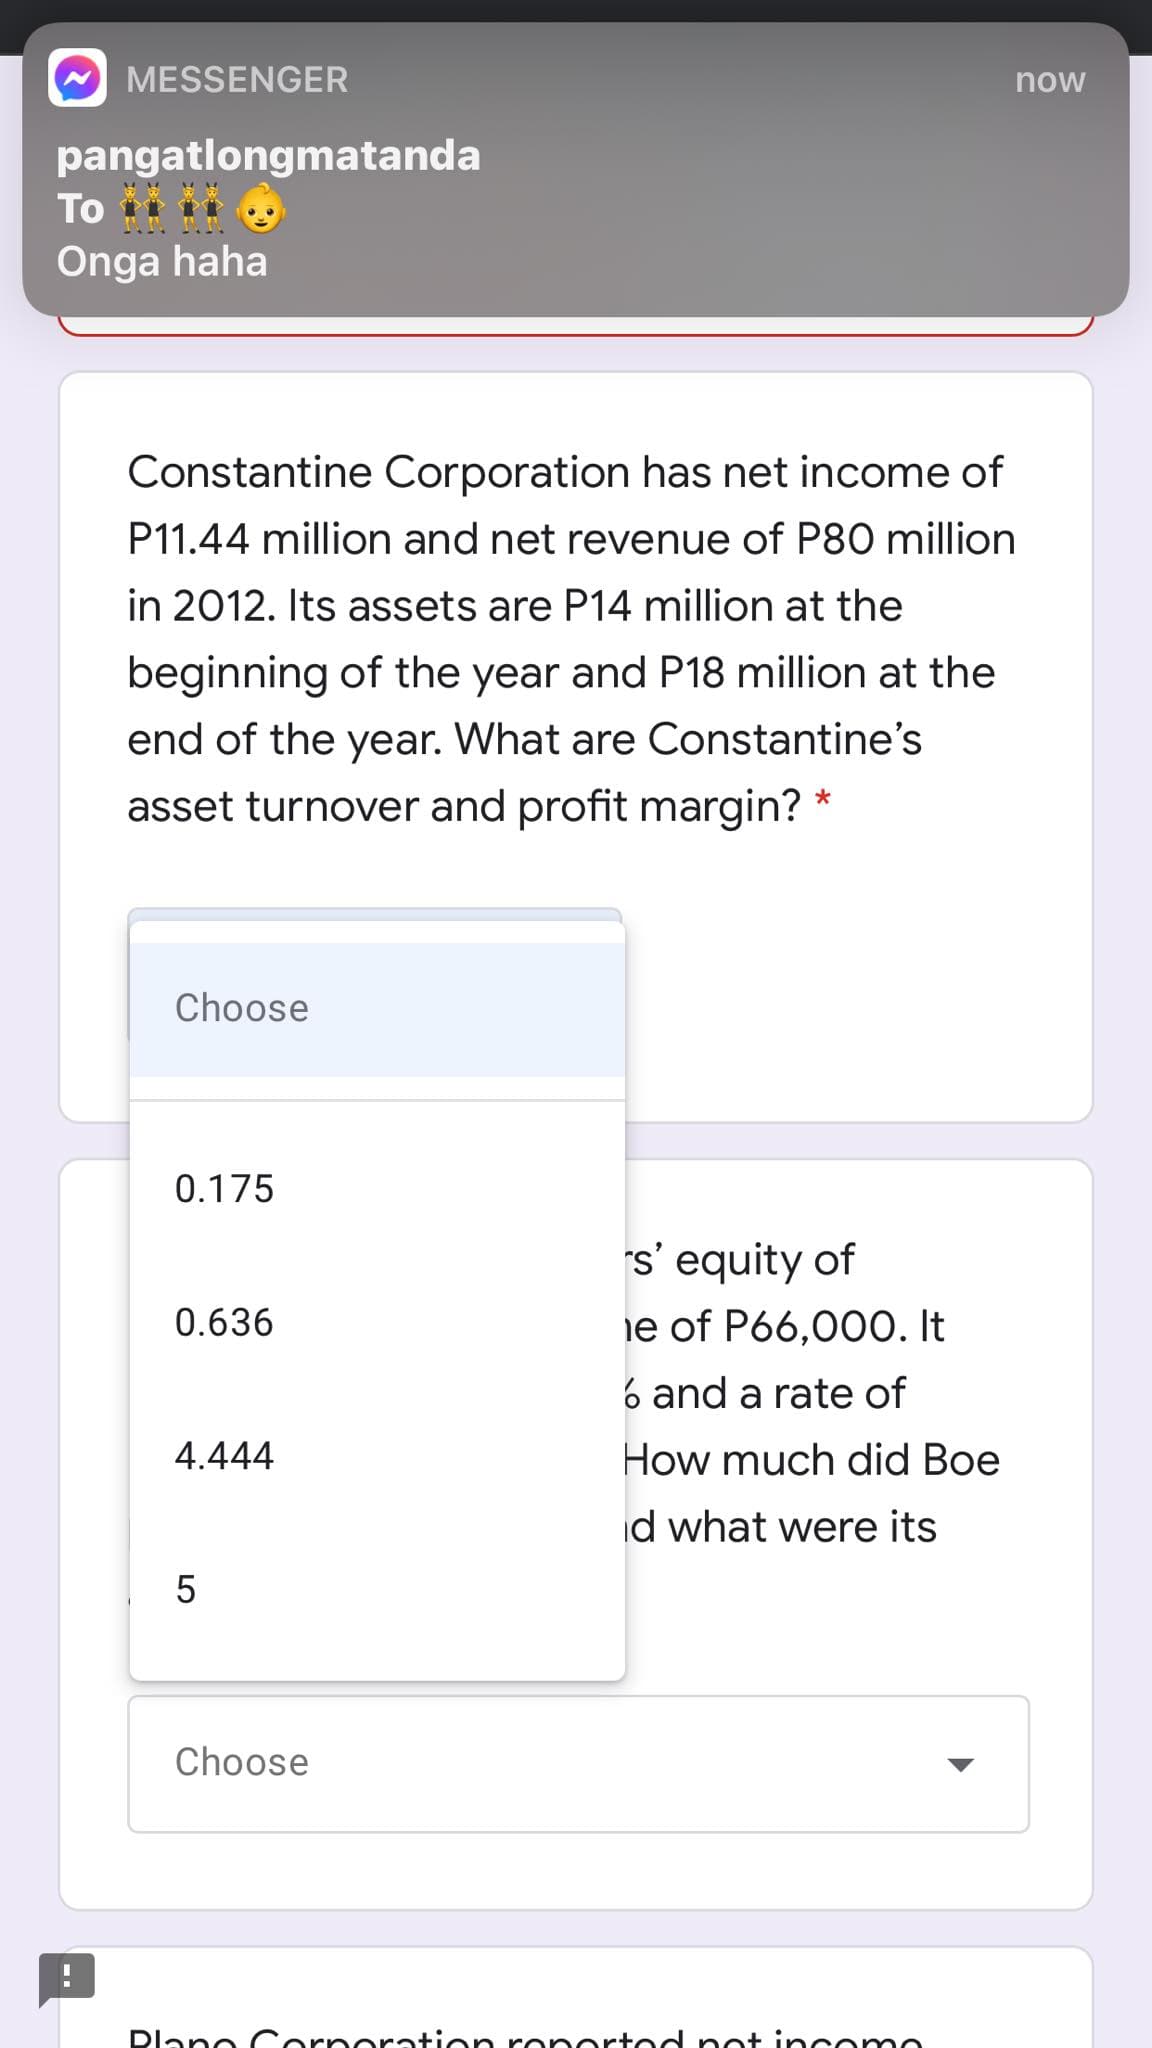 MESSENGER
now
pangatlongmatanda
To
Onga haha
Constantine Corporation has net income of
P11.44 million and net revenue of P80 million
in 2012. Its assets are P14 million at the
beginning of the year and P18 million at the
end of the year. What are Constantine's
asset turnover and profit margin? *
Choose
0.175
s' equity of
ie of P66,000. It
0.636
6 and a rate of
4.444
How much did Boe
id what were its
5
Choose
Dlane Cerneration ronertod pot in ceme
